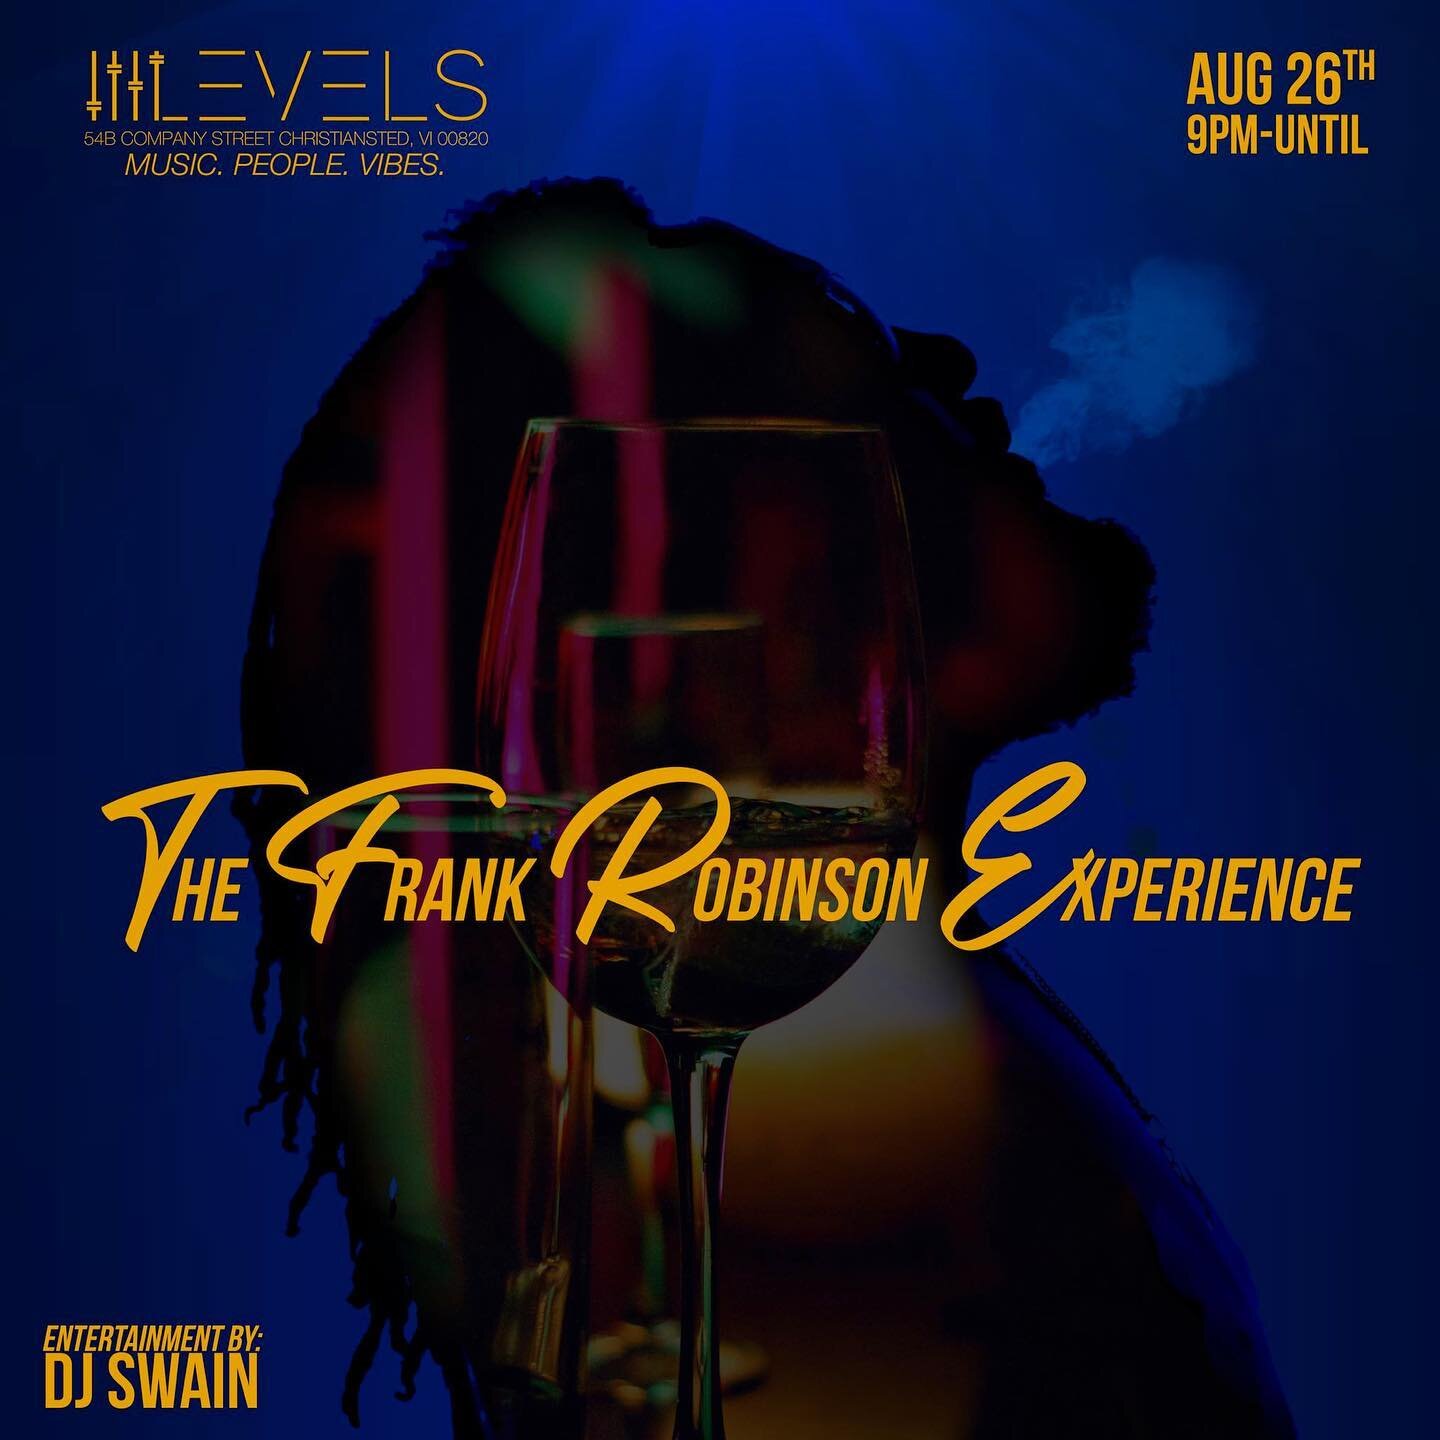 Thursday night come for THE FRANK ROBINSON EXPERIENCE. Drinks, music and dancing, hosted by none other than @frankrobinsonvi. 9pm until 💥🥂